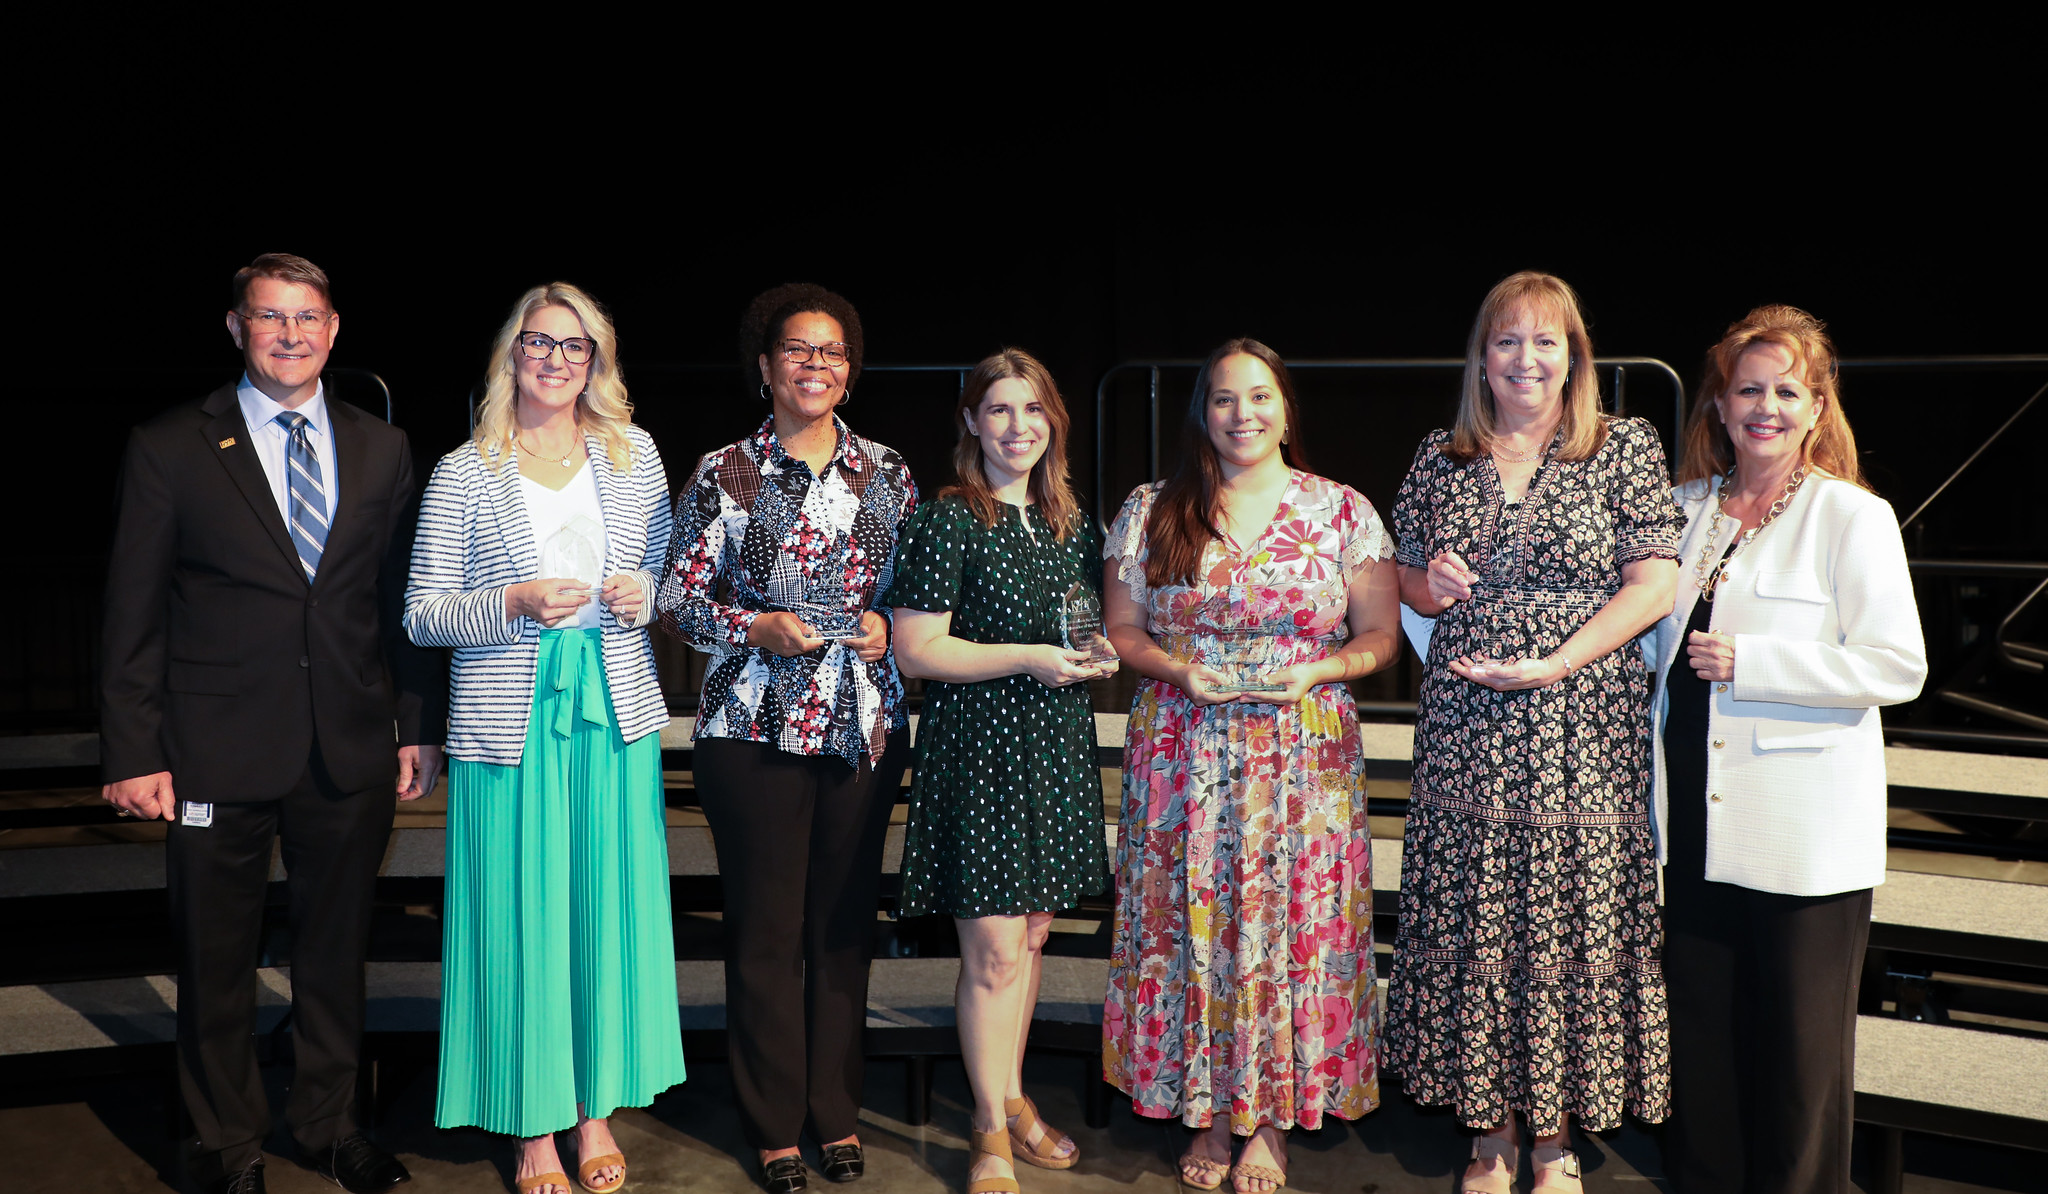 Katy ISD Celebrates Excellence in Education with Prestigious 'Of the Year' Awards Ceremony